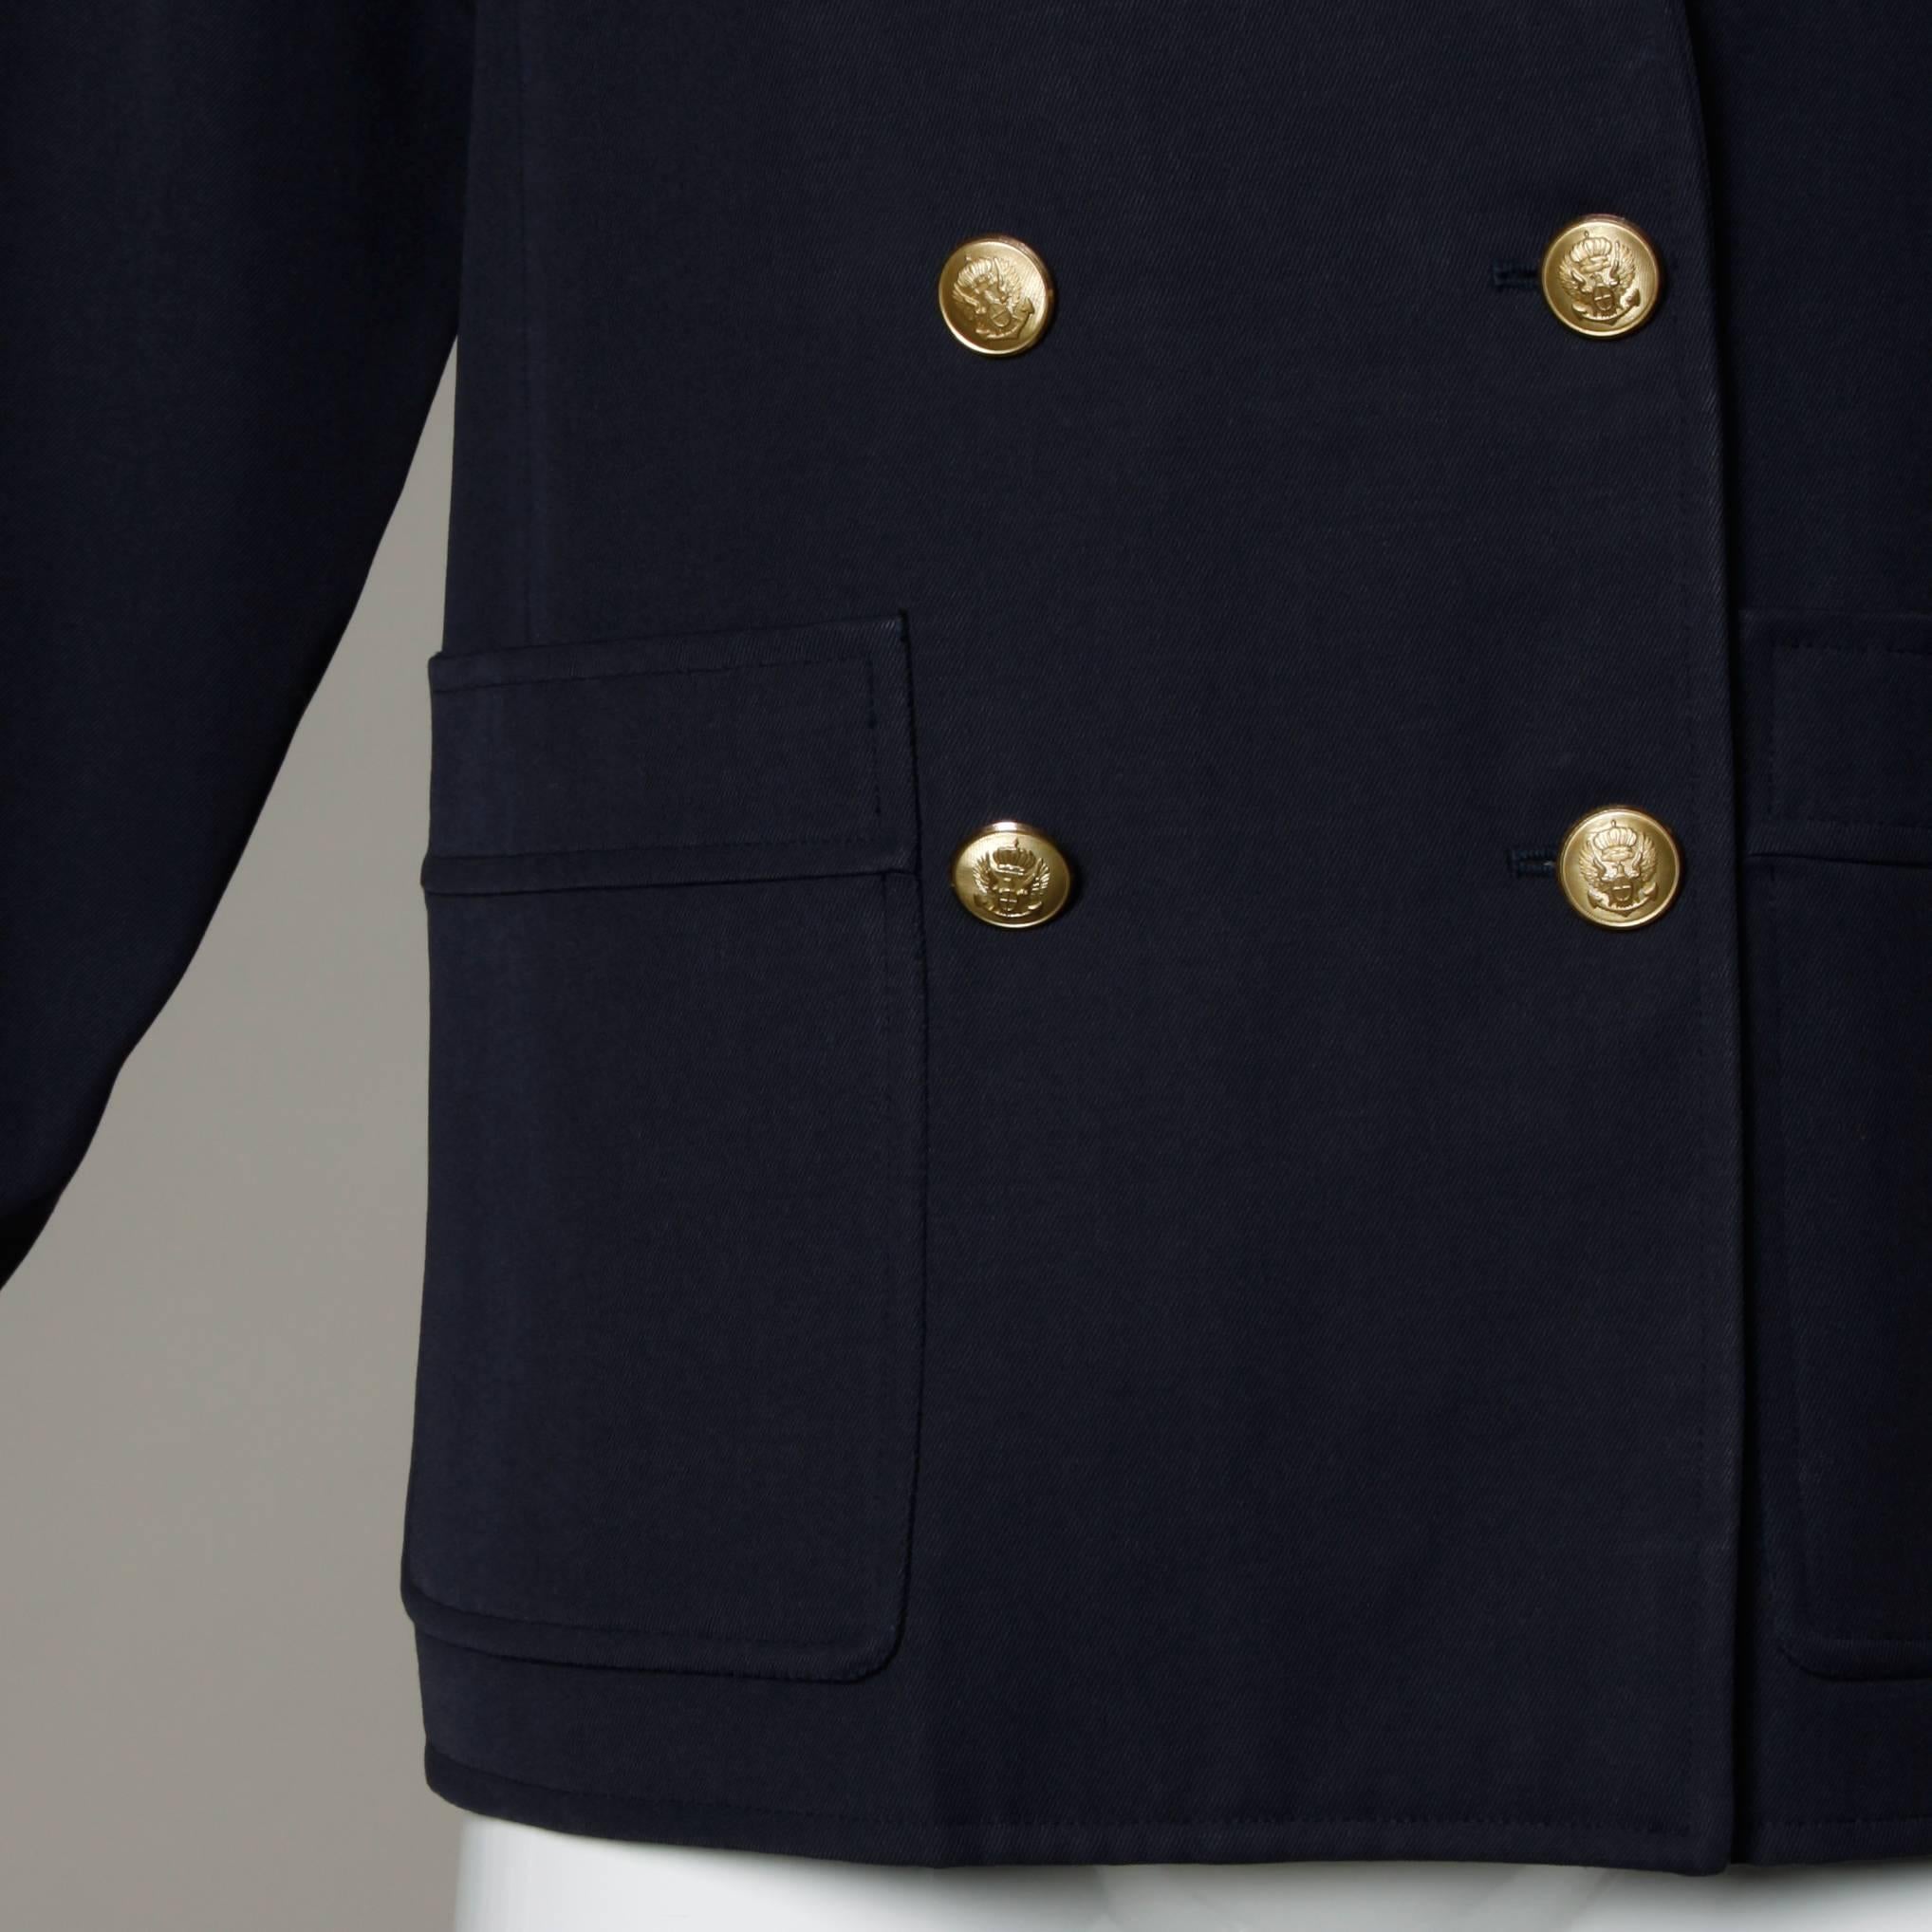 Vintage navy blue military-inspired wool blazer jacket by Saint Laurent Rive Gauche. Oversized boxy fit and gold buttons.

Details:

Fully Lined
Front Pockets
Front Button Closure
Marked Size: IT 34
Color: Navy Blue
Fabric: Not Marked/